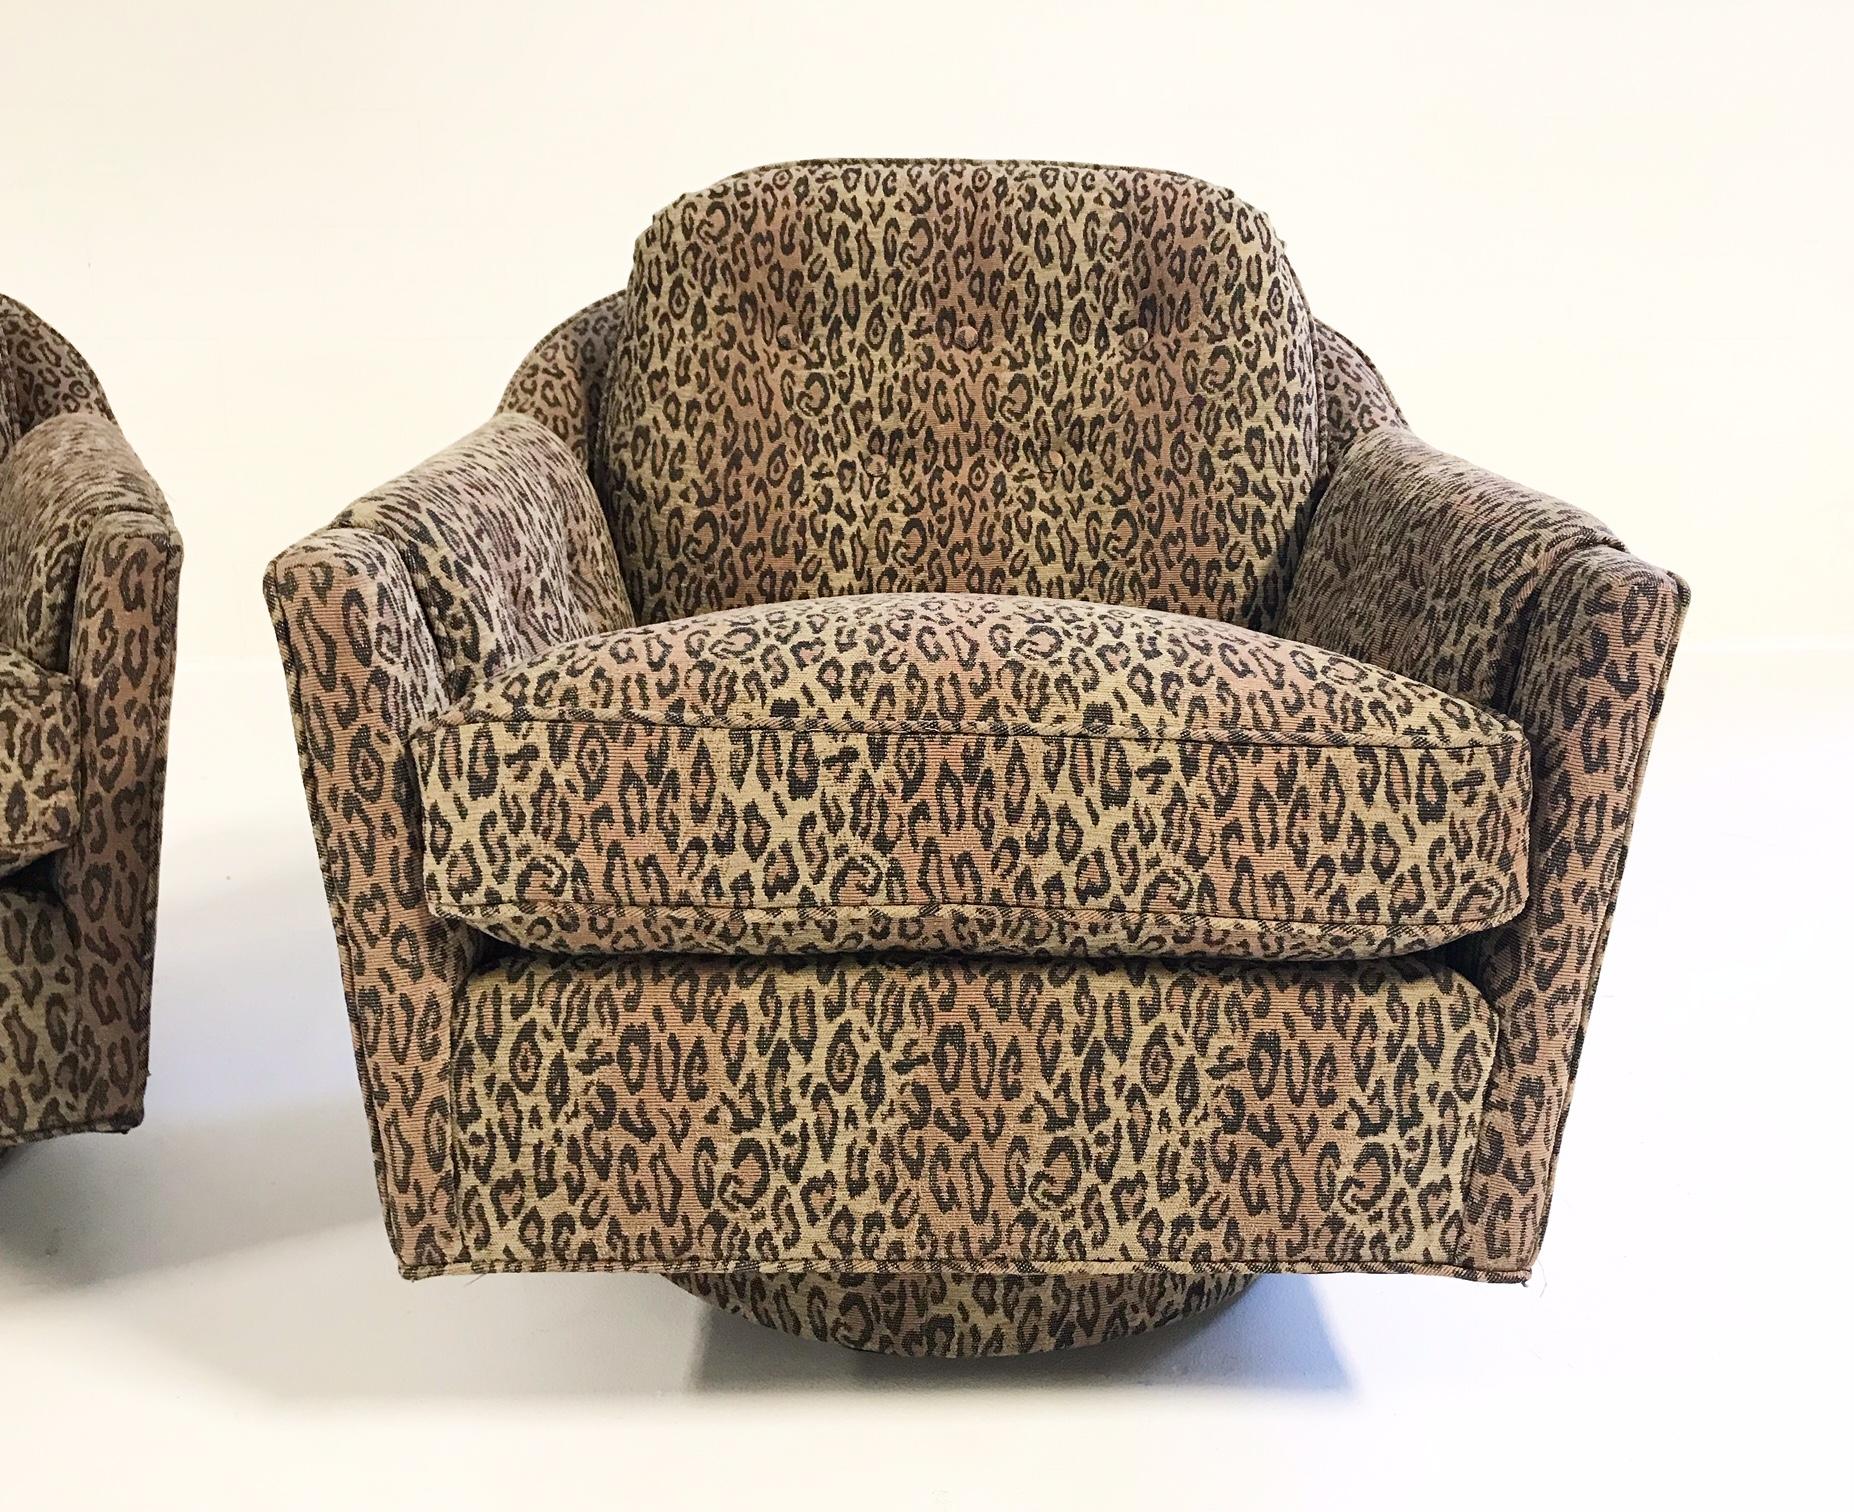 Swivel Lounge Chairs in the style of Milo Baughman, in Kravet Leopard Print In Excellent Condition For Sale In SAINT LOUIS, MO